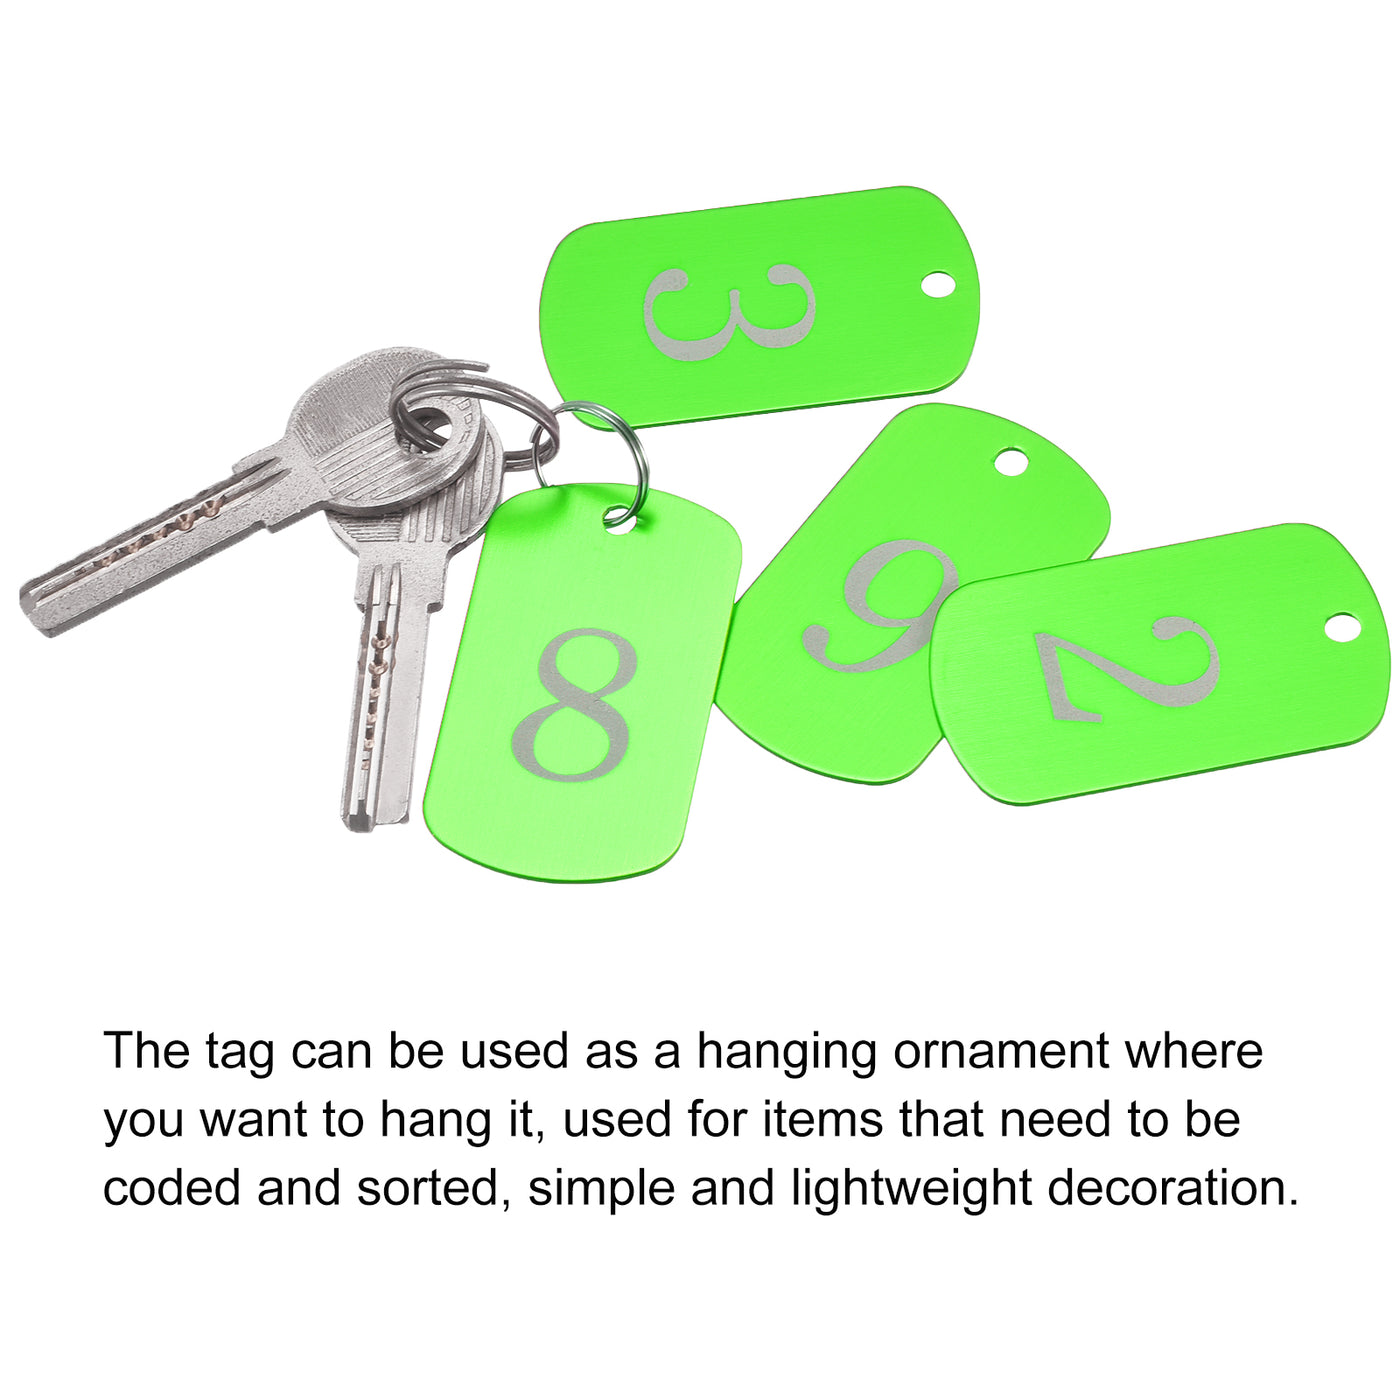 Harfington Aluminum Metal Key Tag, Number Tag, ID Tag with Ring Rectangle Blank for Decoration